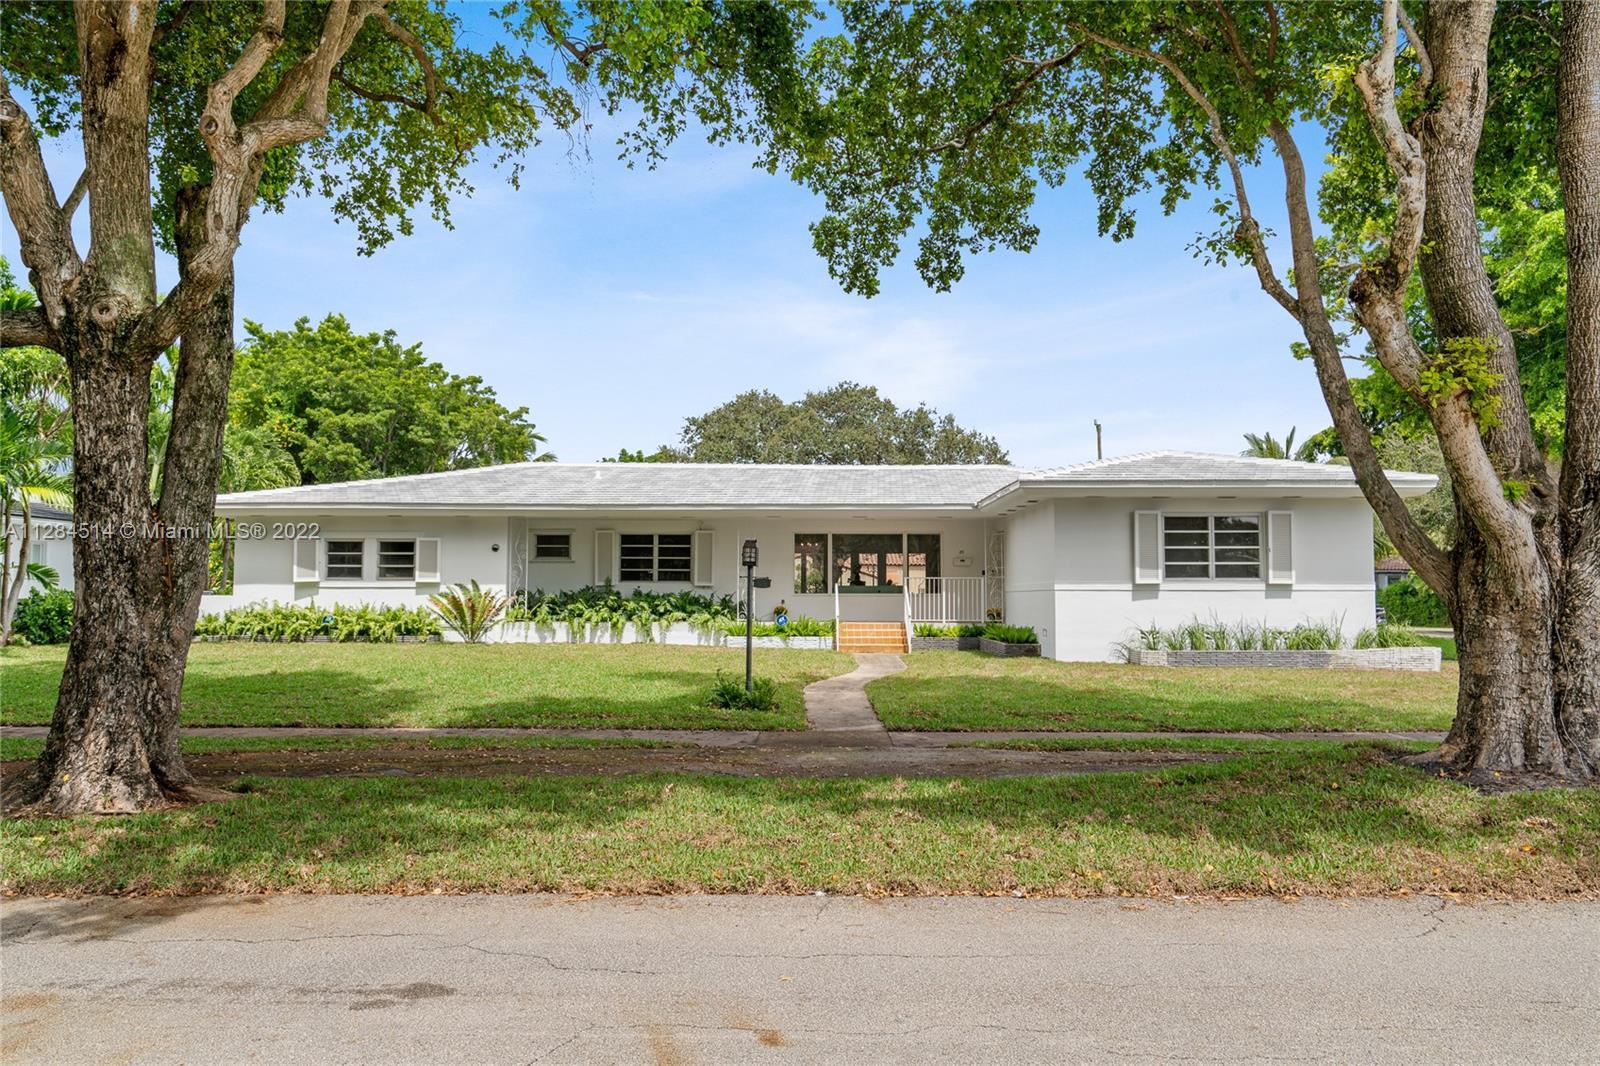 Beautiful 4 bed 3 bath large open concept home in the heart of Miami Shores. Sitting on an oversized